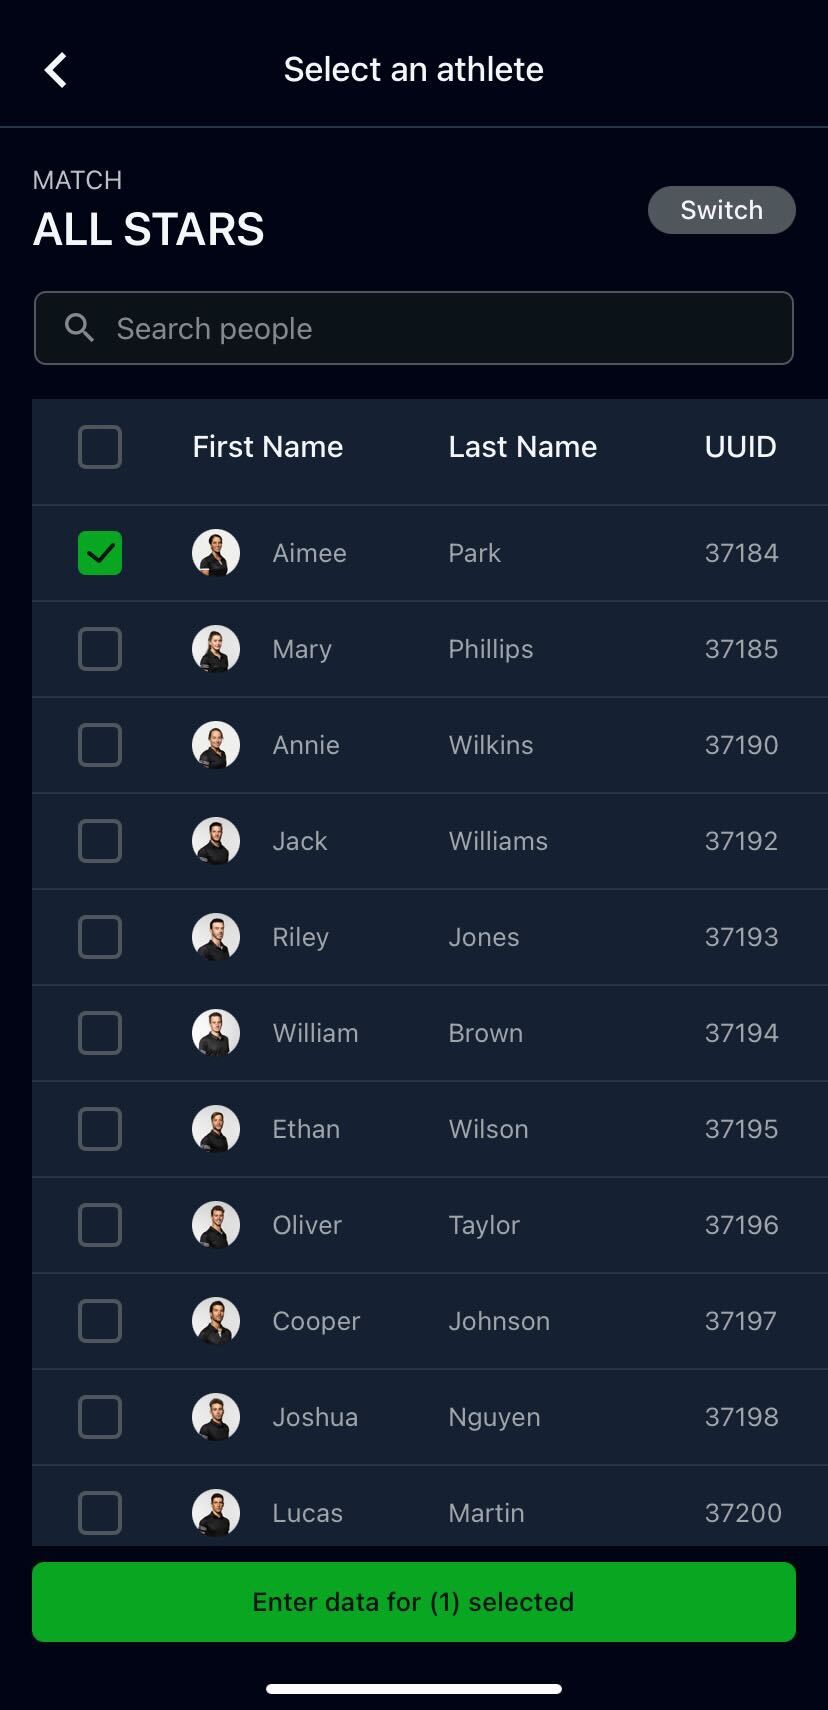 A screenshot of the athlete selection screen for a professional user to enter data on the Smartabase app.